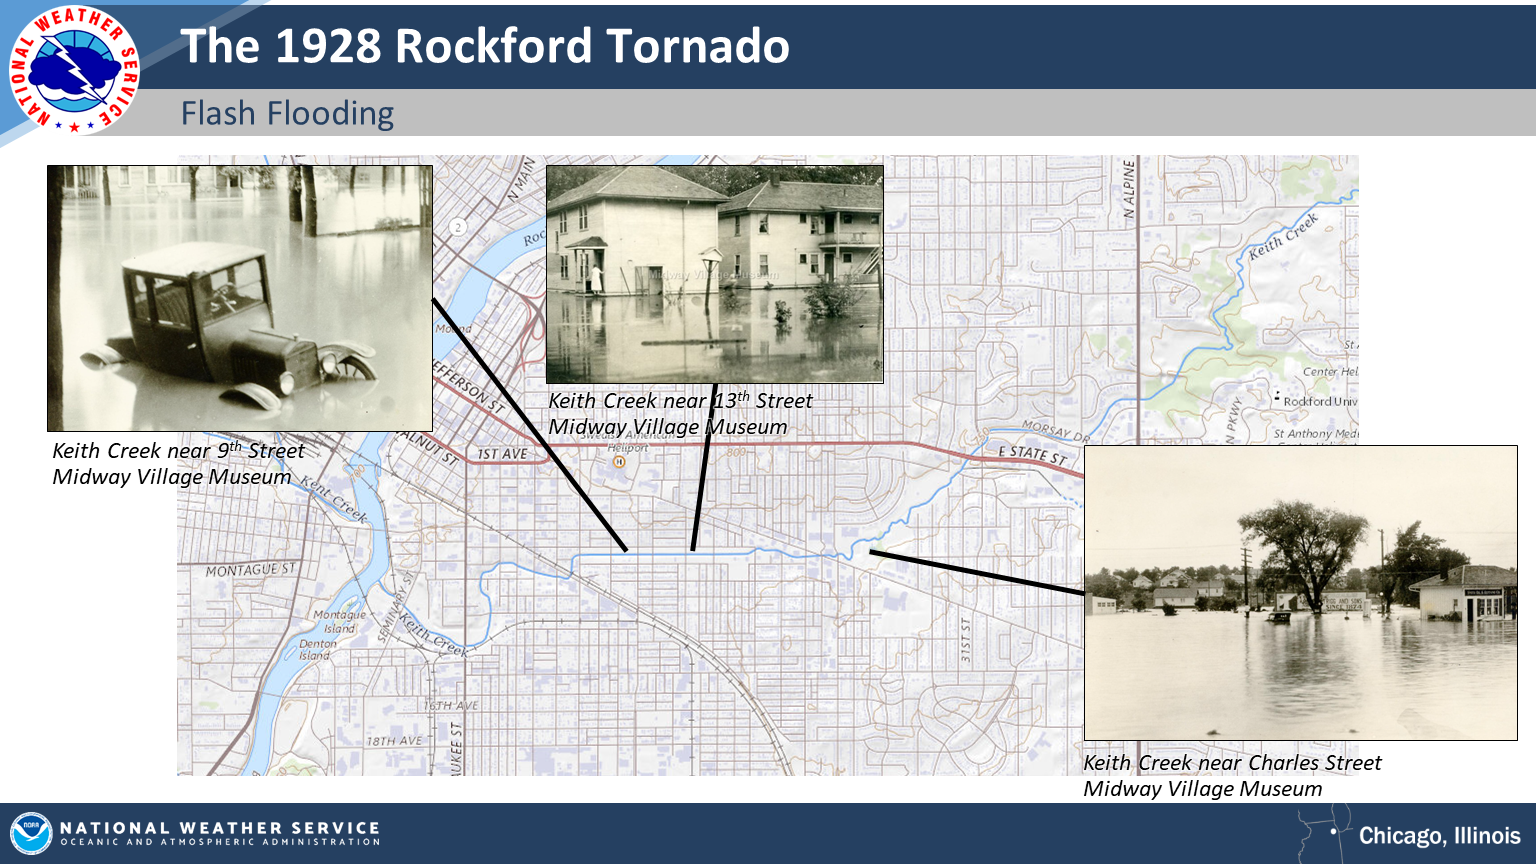 Map of flooding in Rockford after the 1928 tornado. One image shows a flooded car, another image shows two flooded buildings, and a third image shows a large floodplain covered with water.